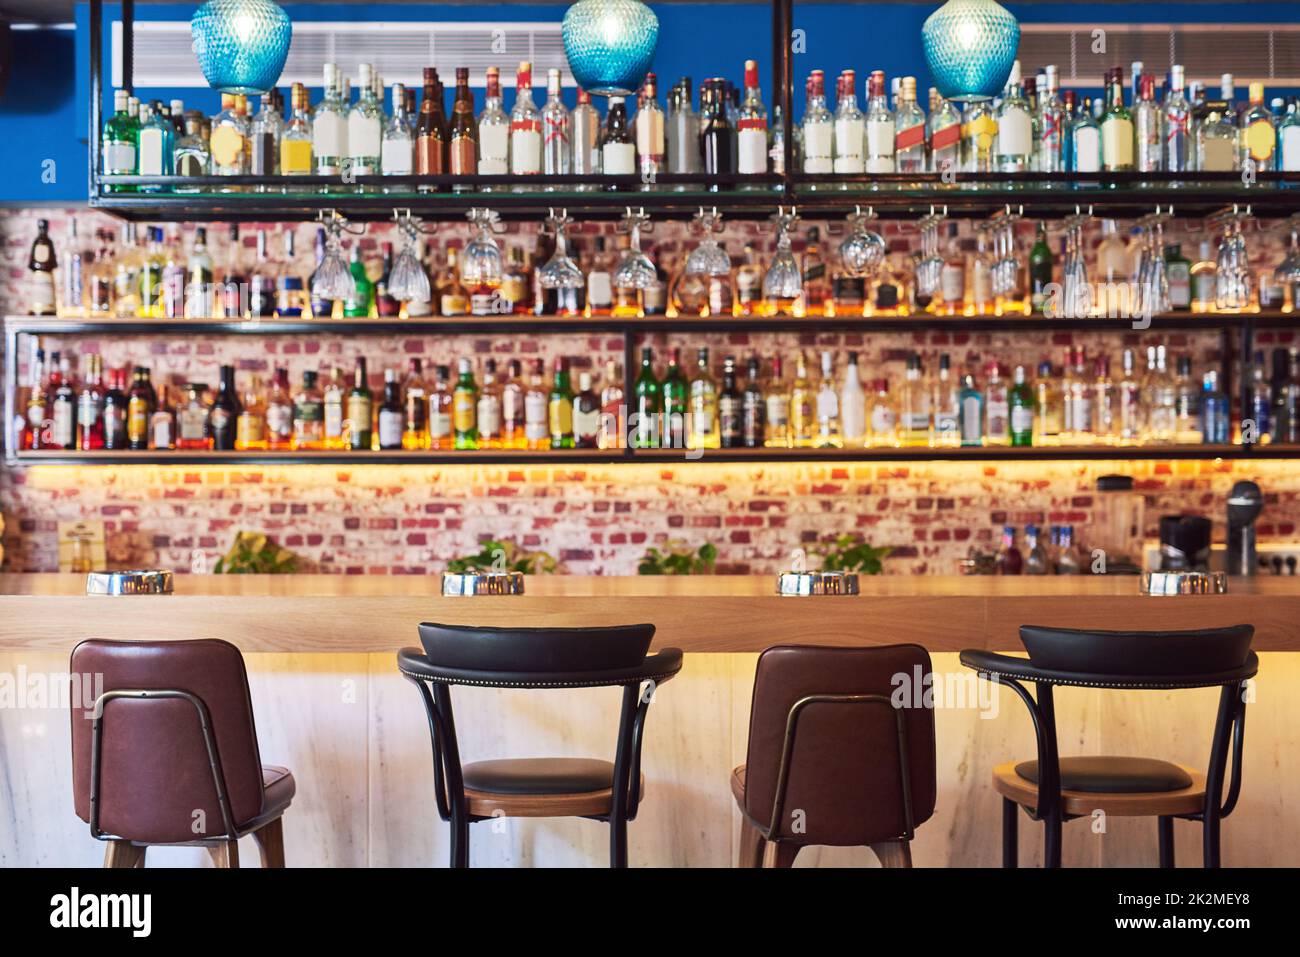 The place to go to have fun. Shot of an immaculate bar with many bottles and glasses with no people. Stock Photo